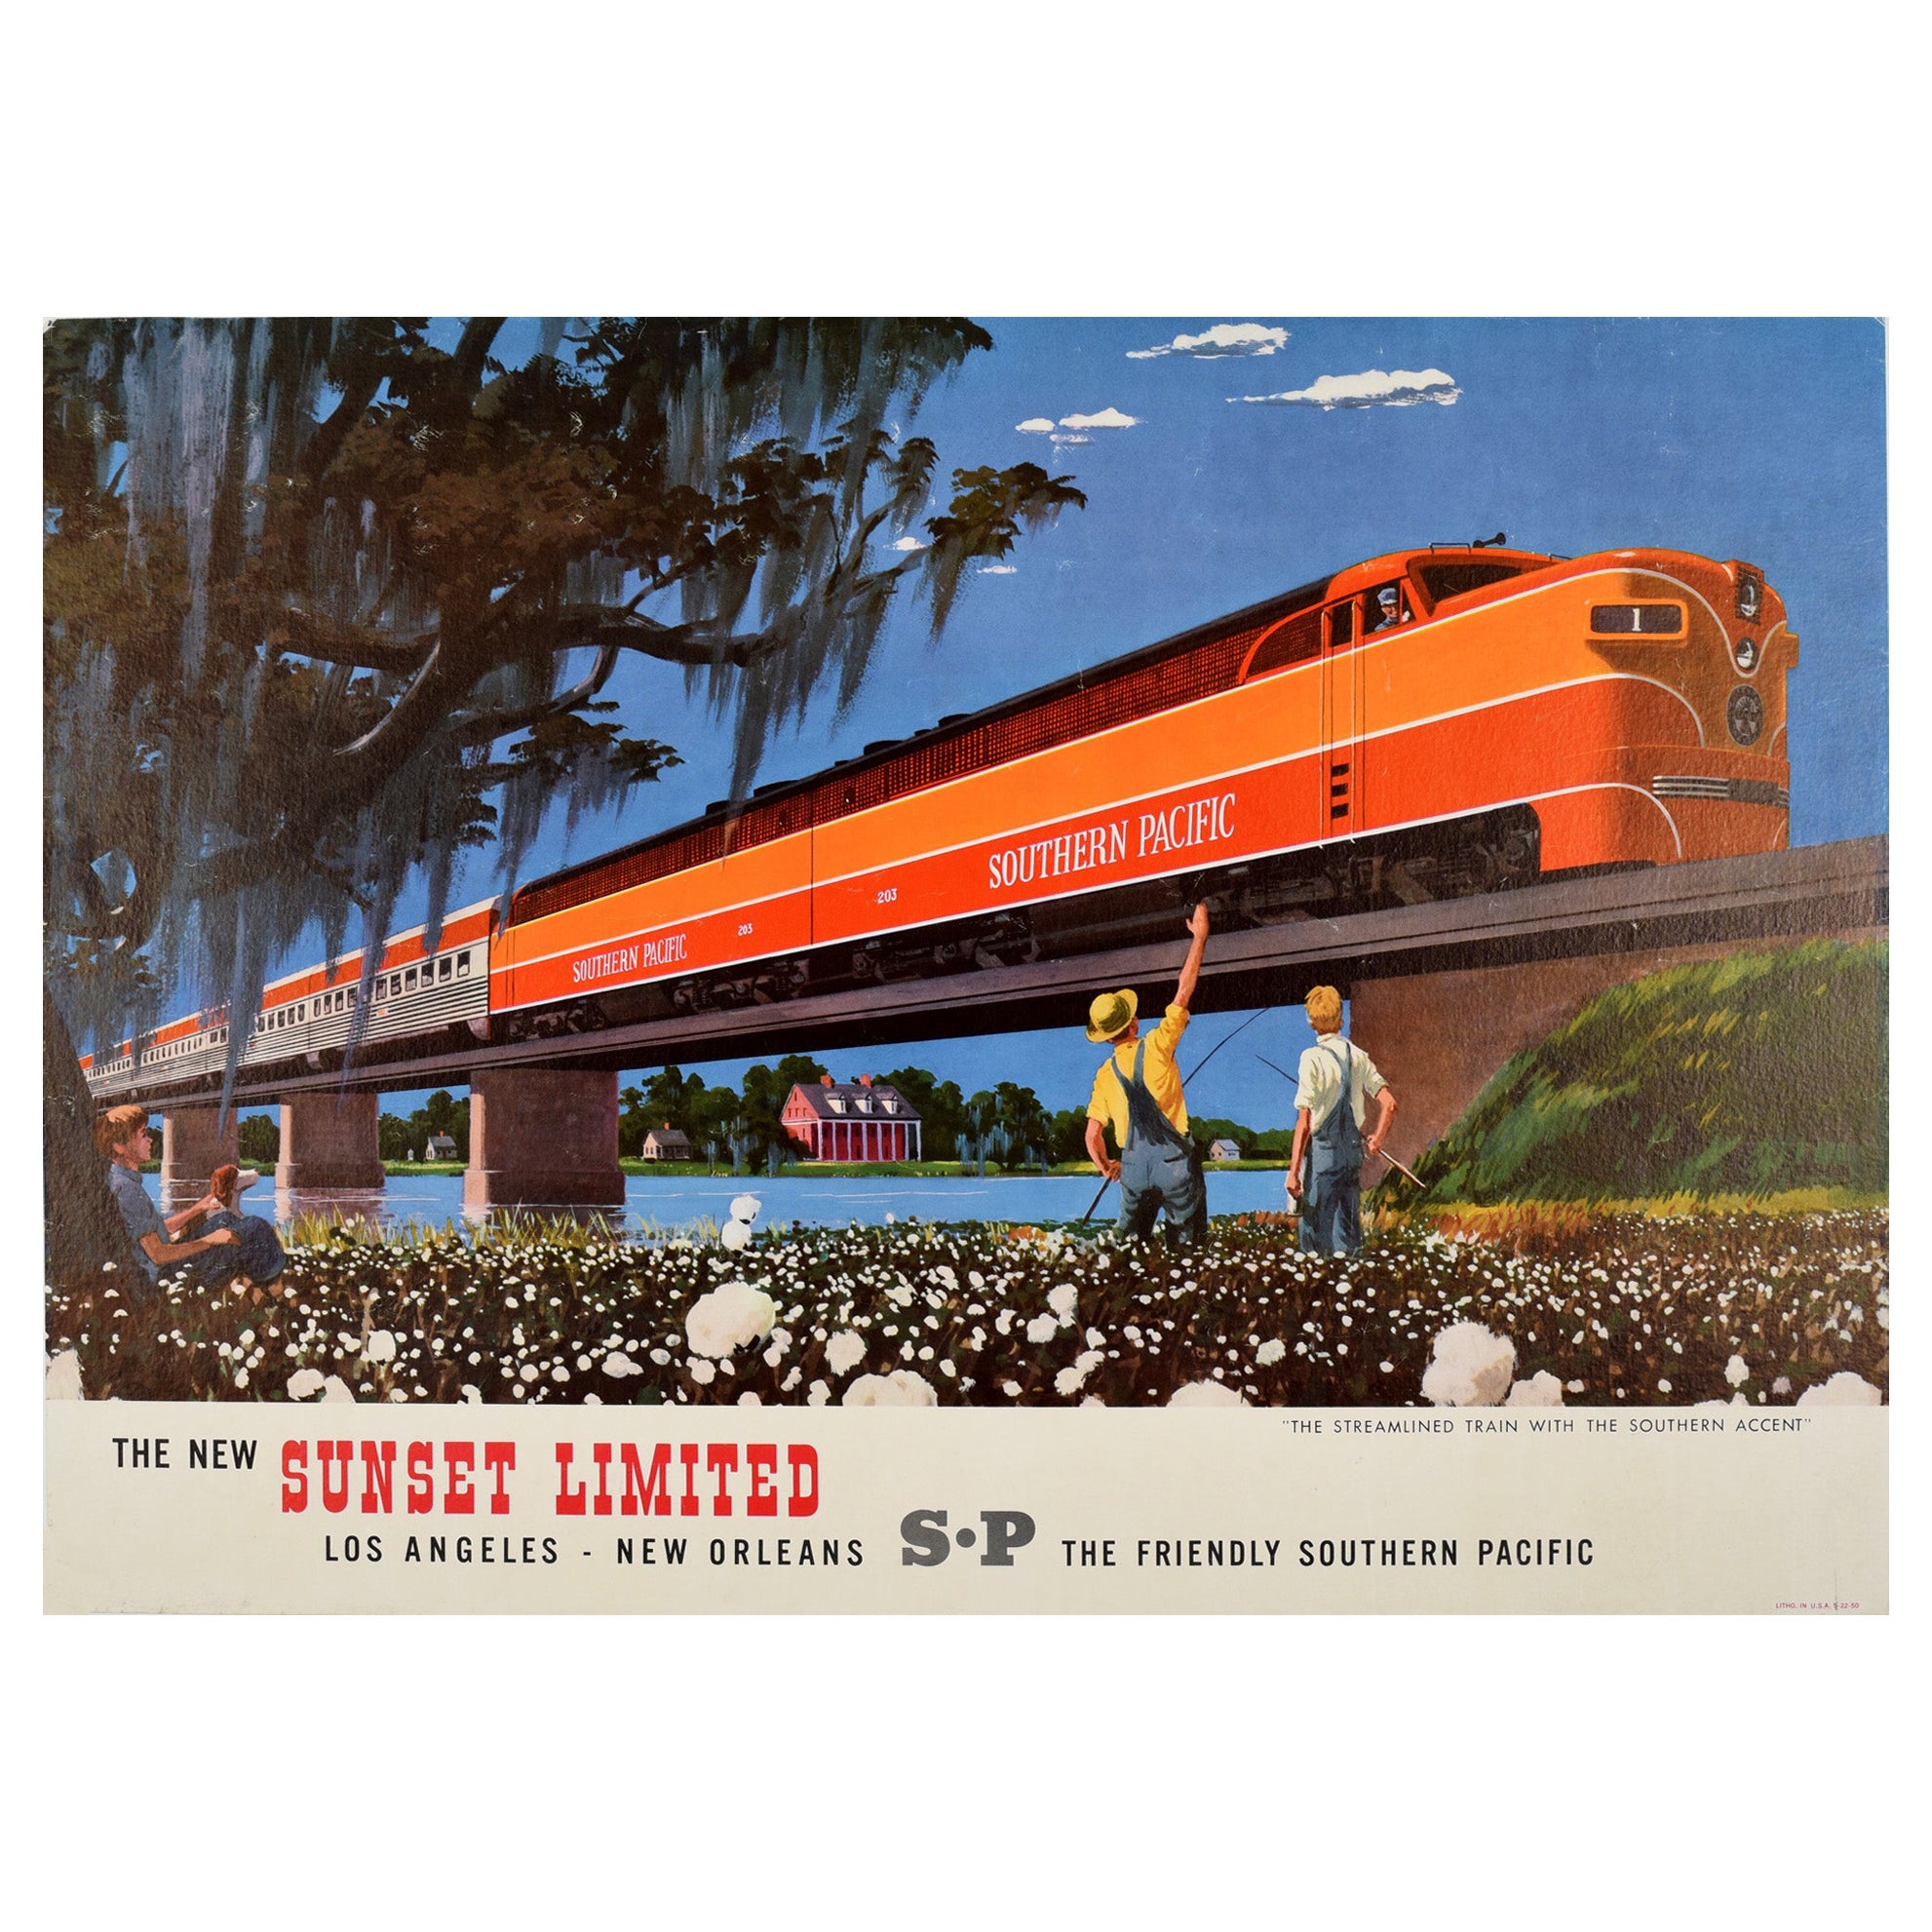 Original Vintage Travel Poster Sunset Limited Railroad Southern Pacific Railway